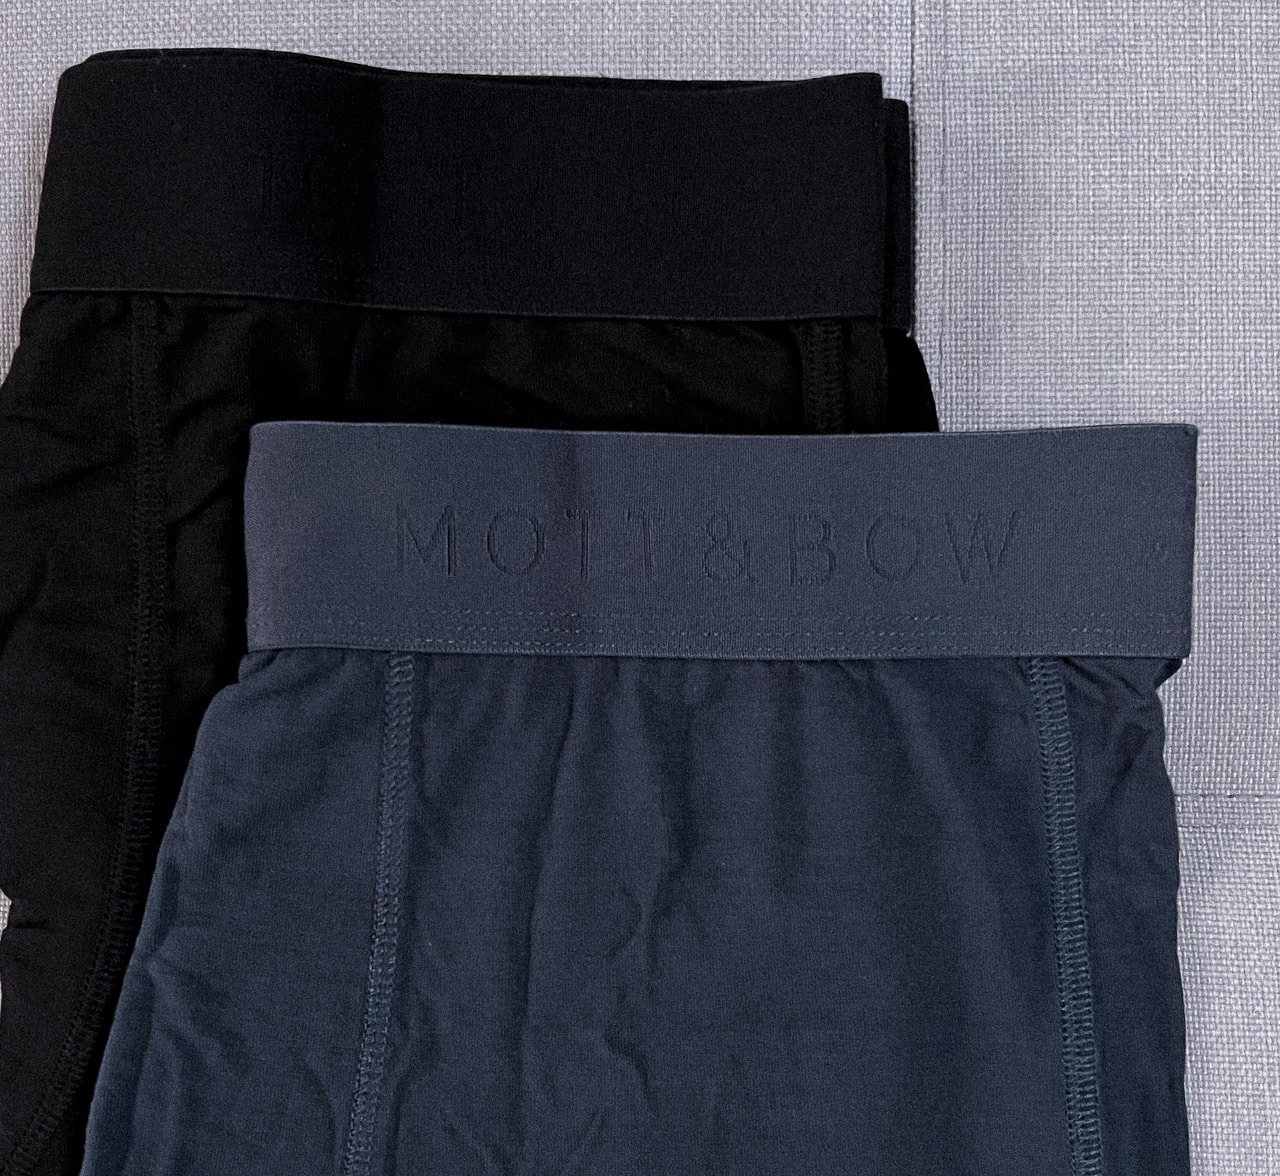 mott and bow boxer brief